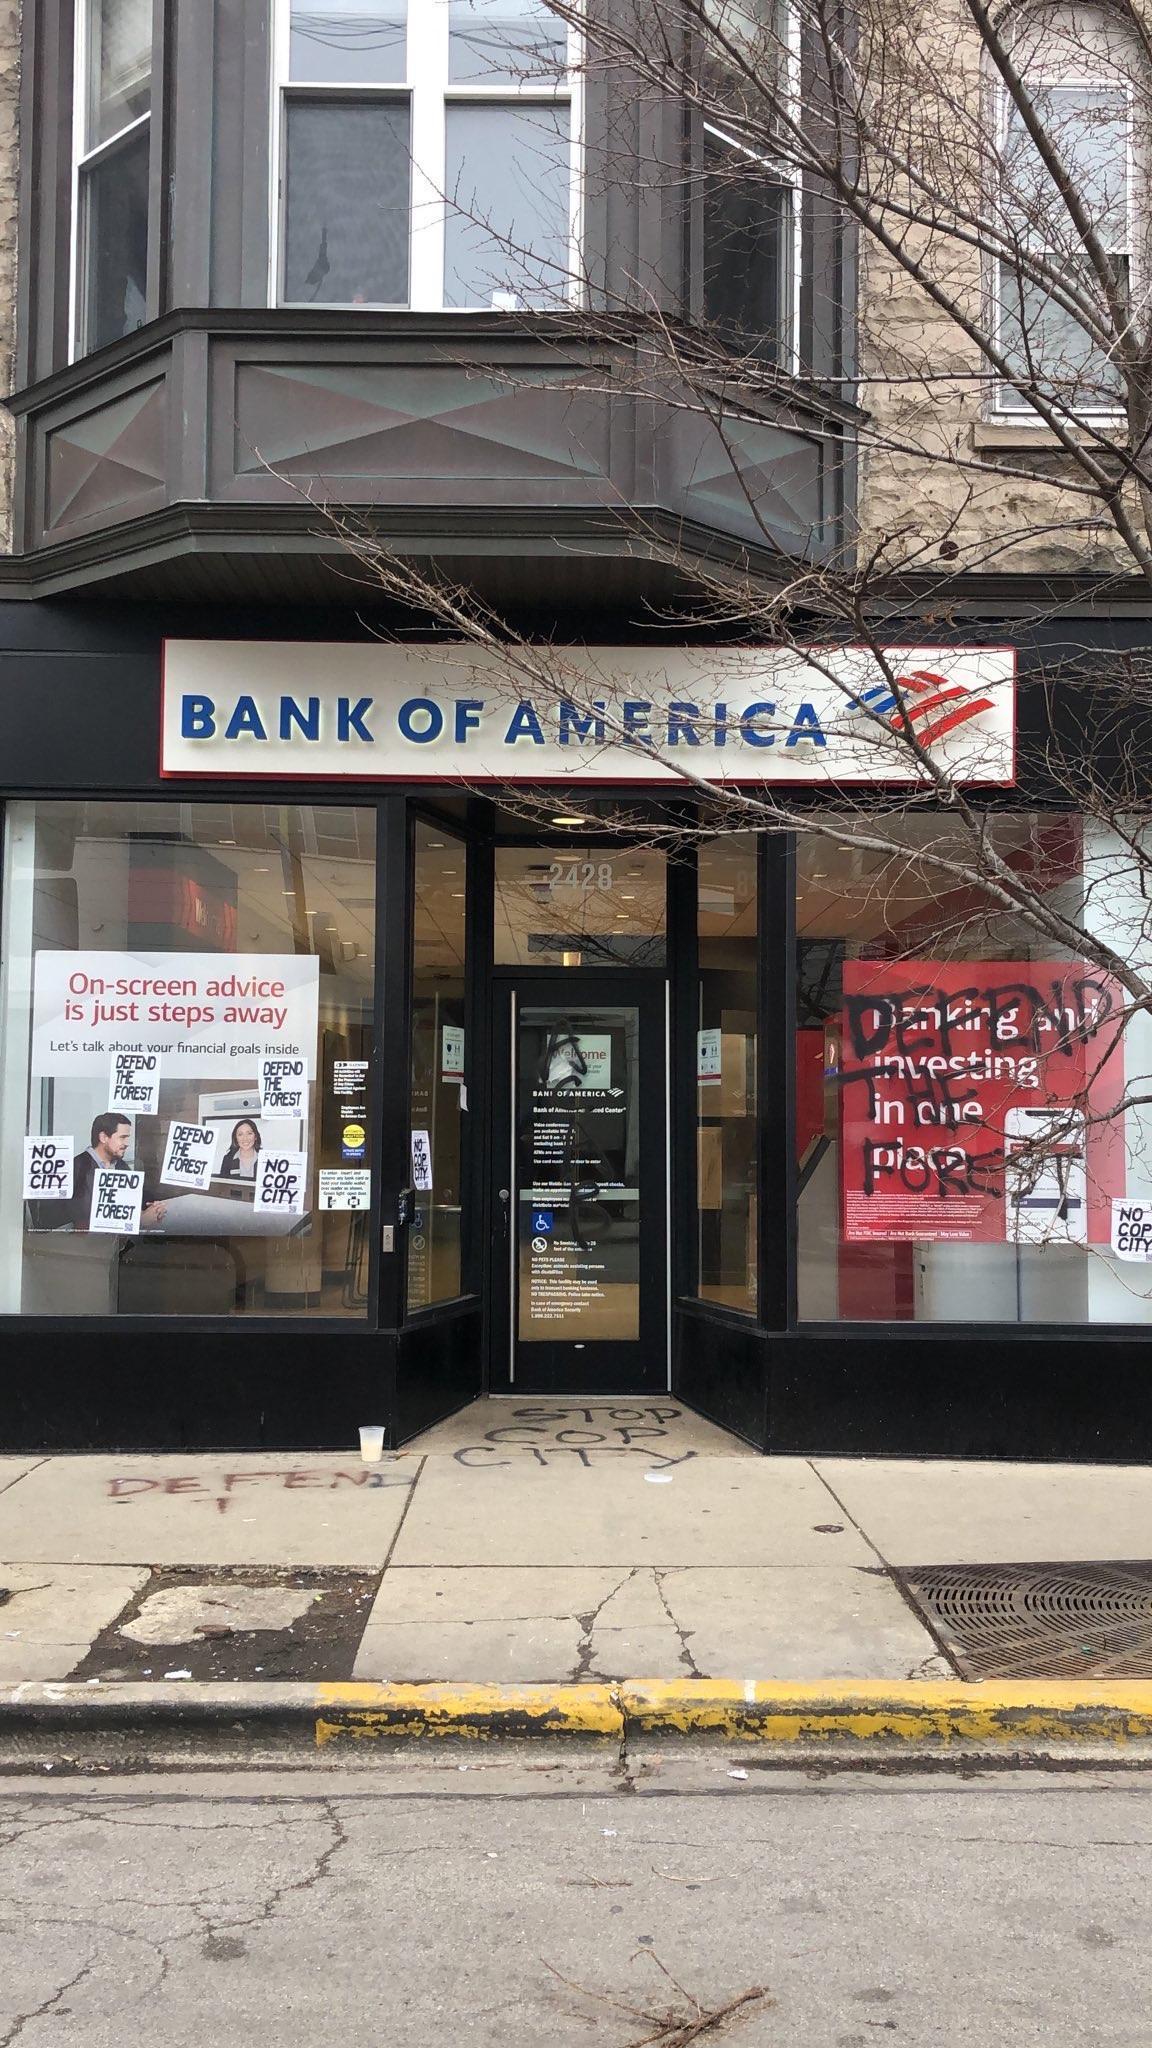 On a city street, a Bank of America bank has tags that say "Defend the Forest" and "Stop Cop City" in black spray paint.